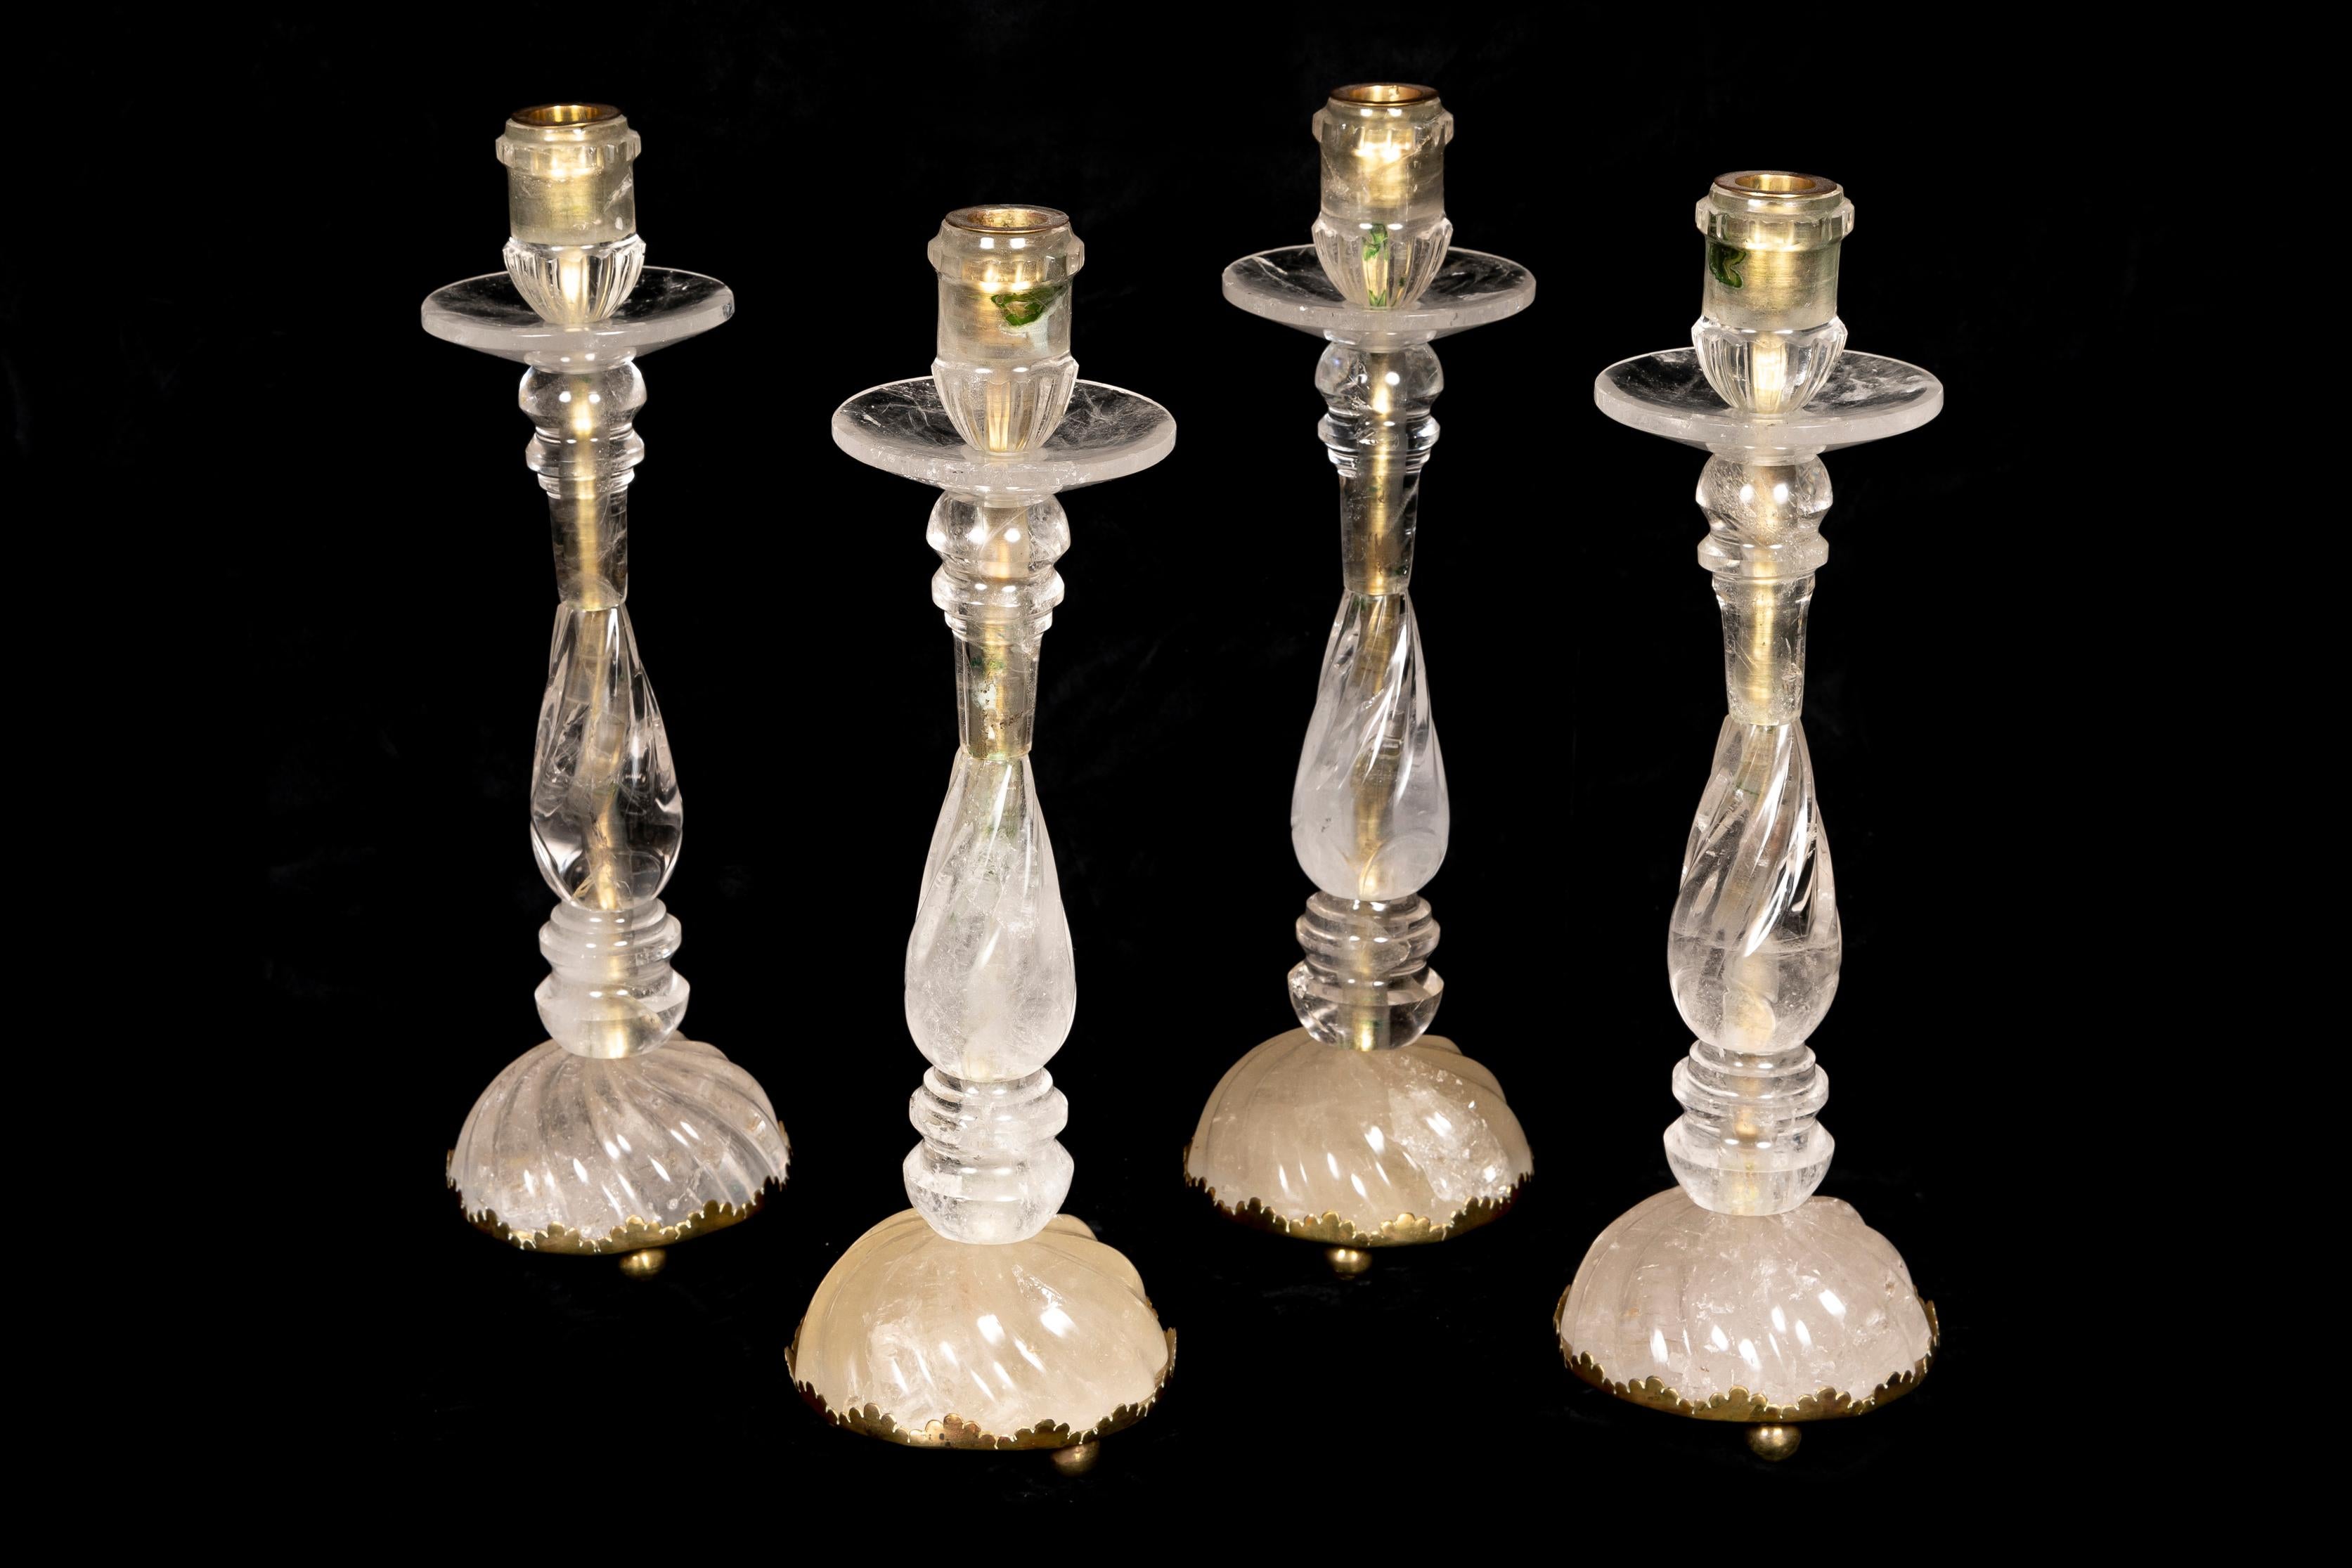 A Set of 4 Large Louis XVI Style Bronze mounted Cut rock crystal candlesticks of fine detail on circular rock crystal bases.